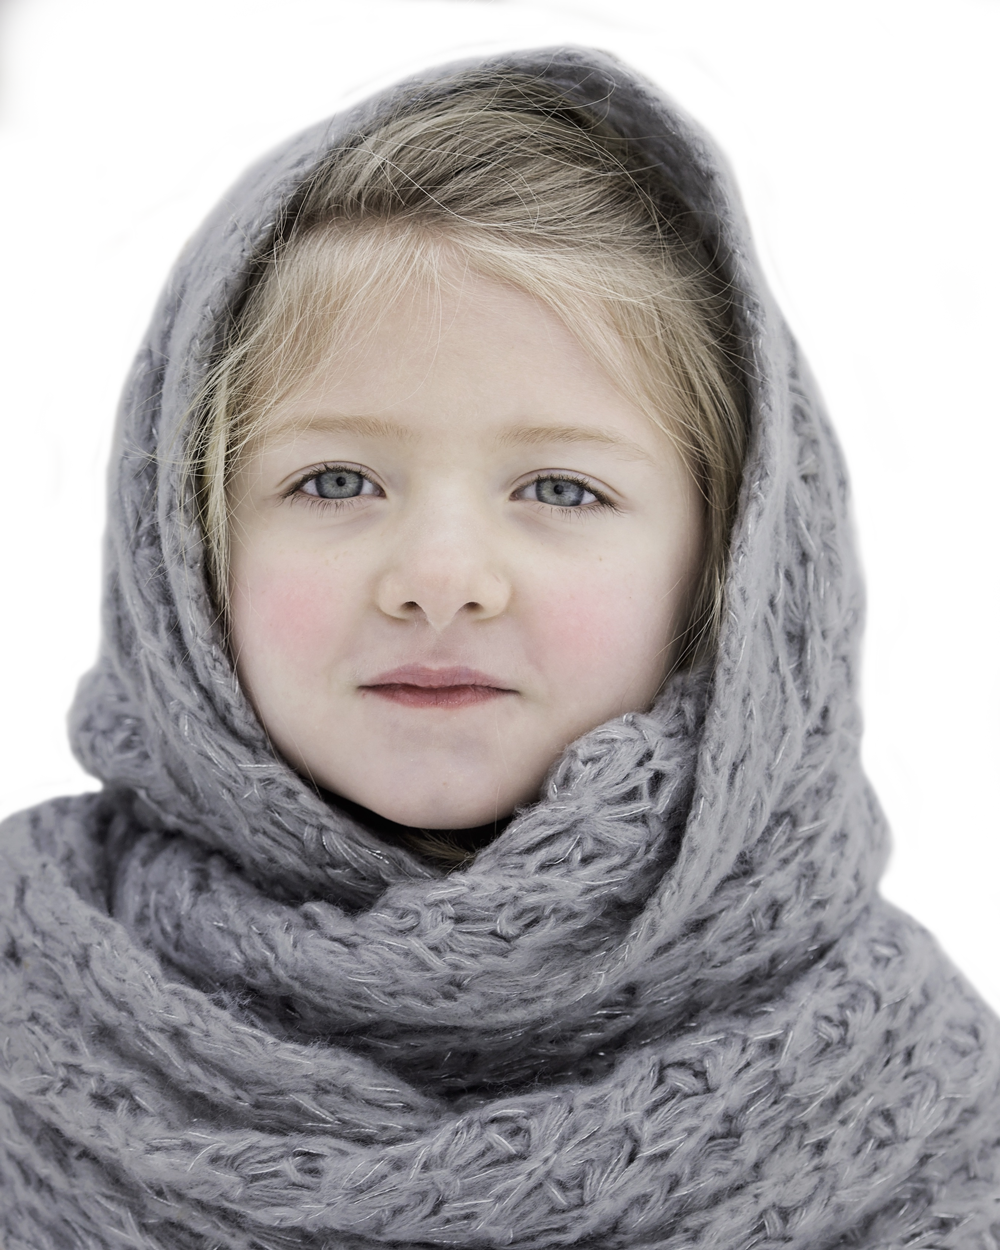 A Girl With A Scarf Around Her Head